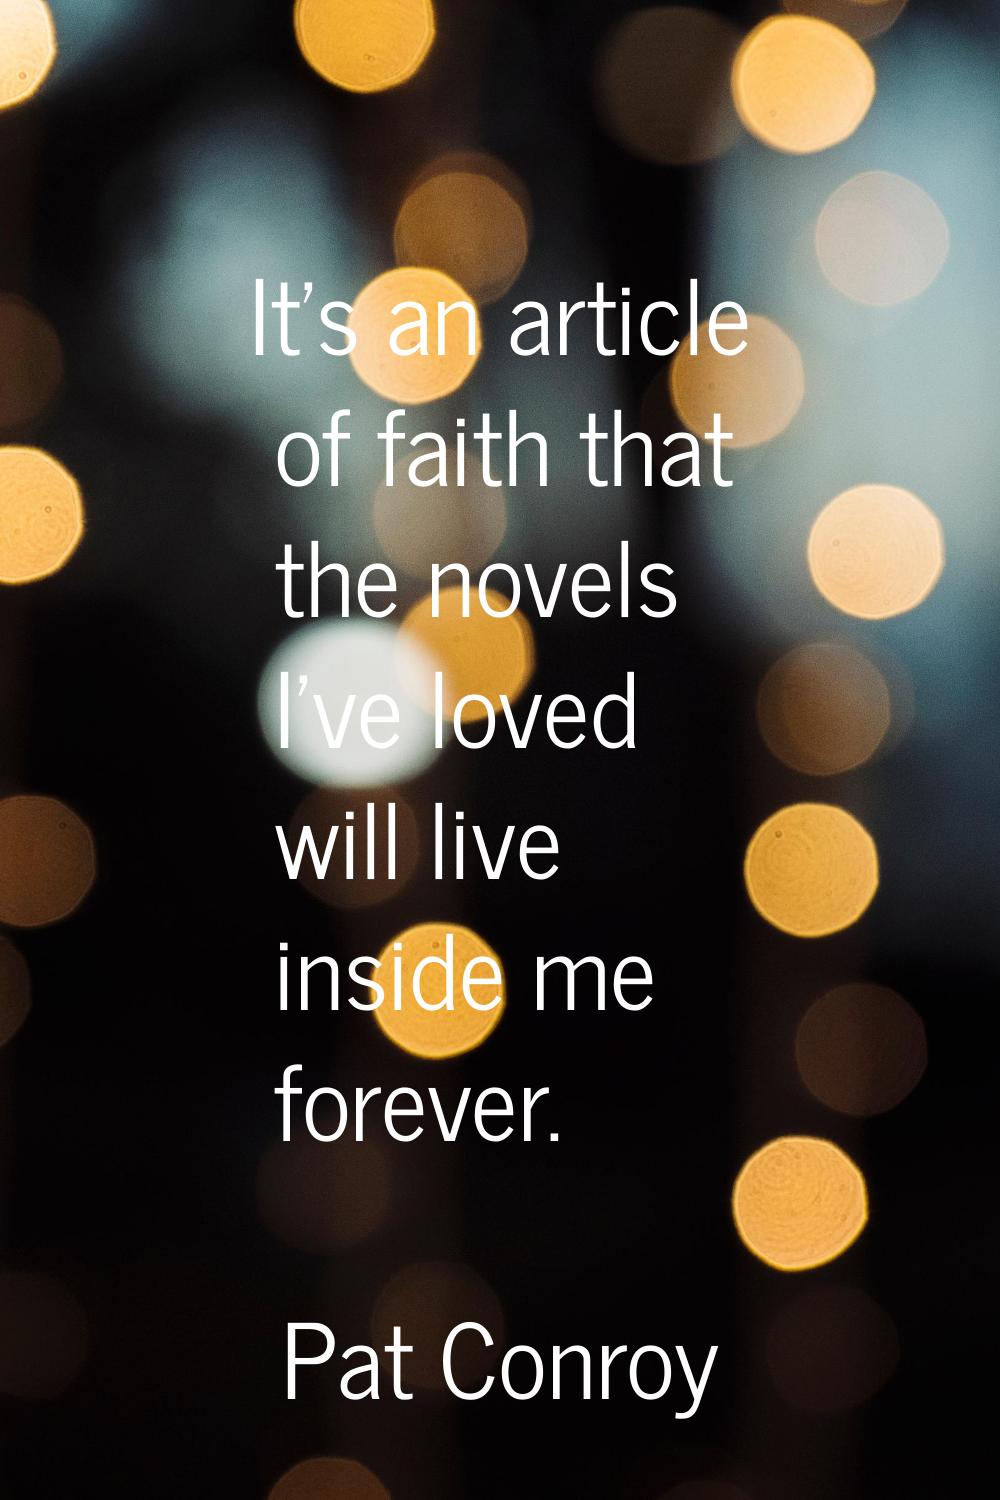 It's an article of faith that the novels I've loved will live inside me forever.